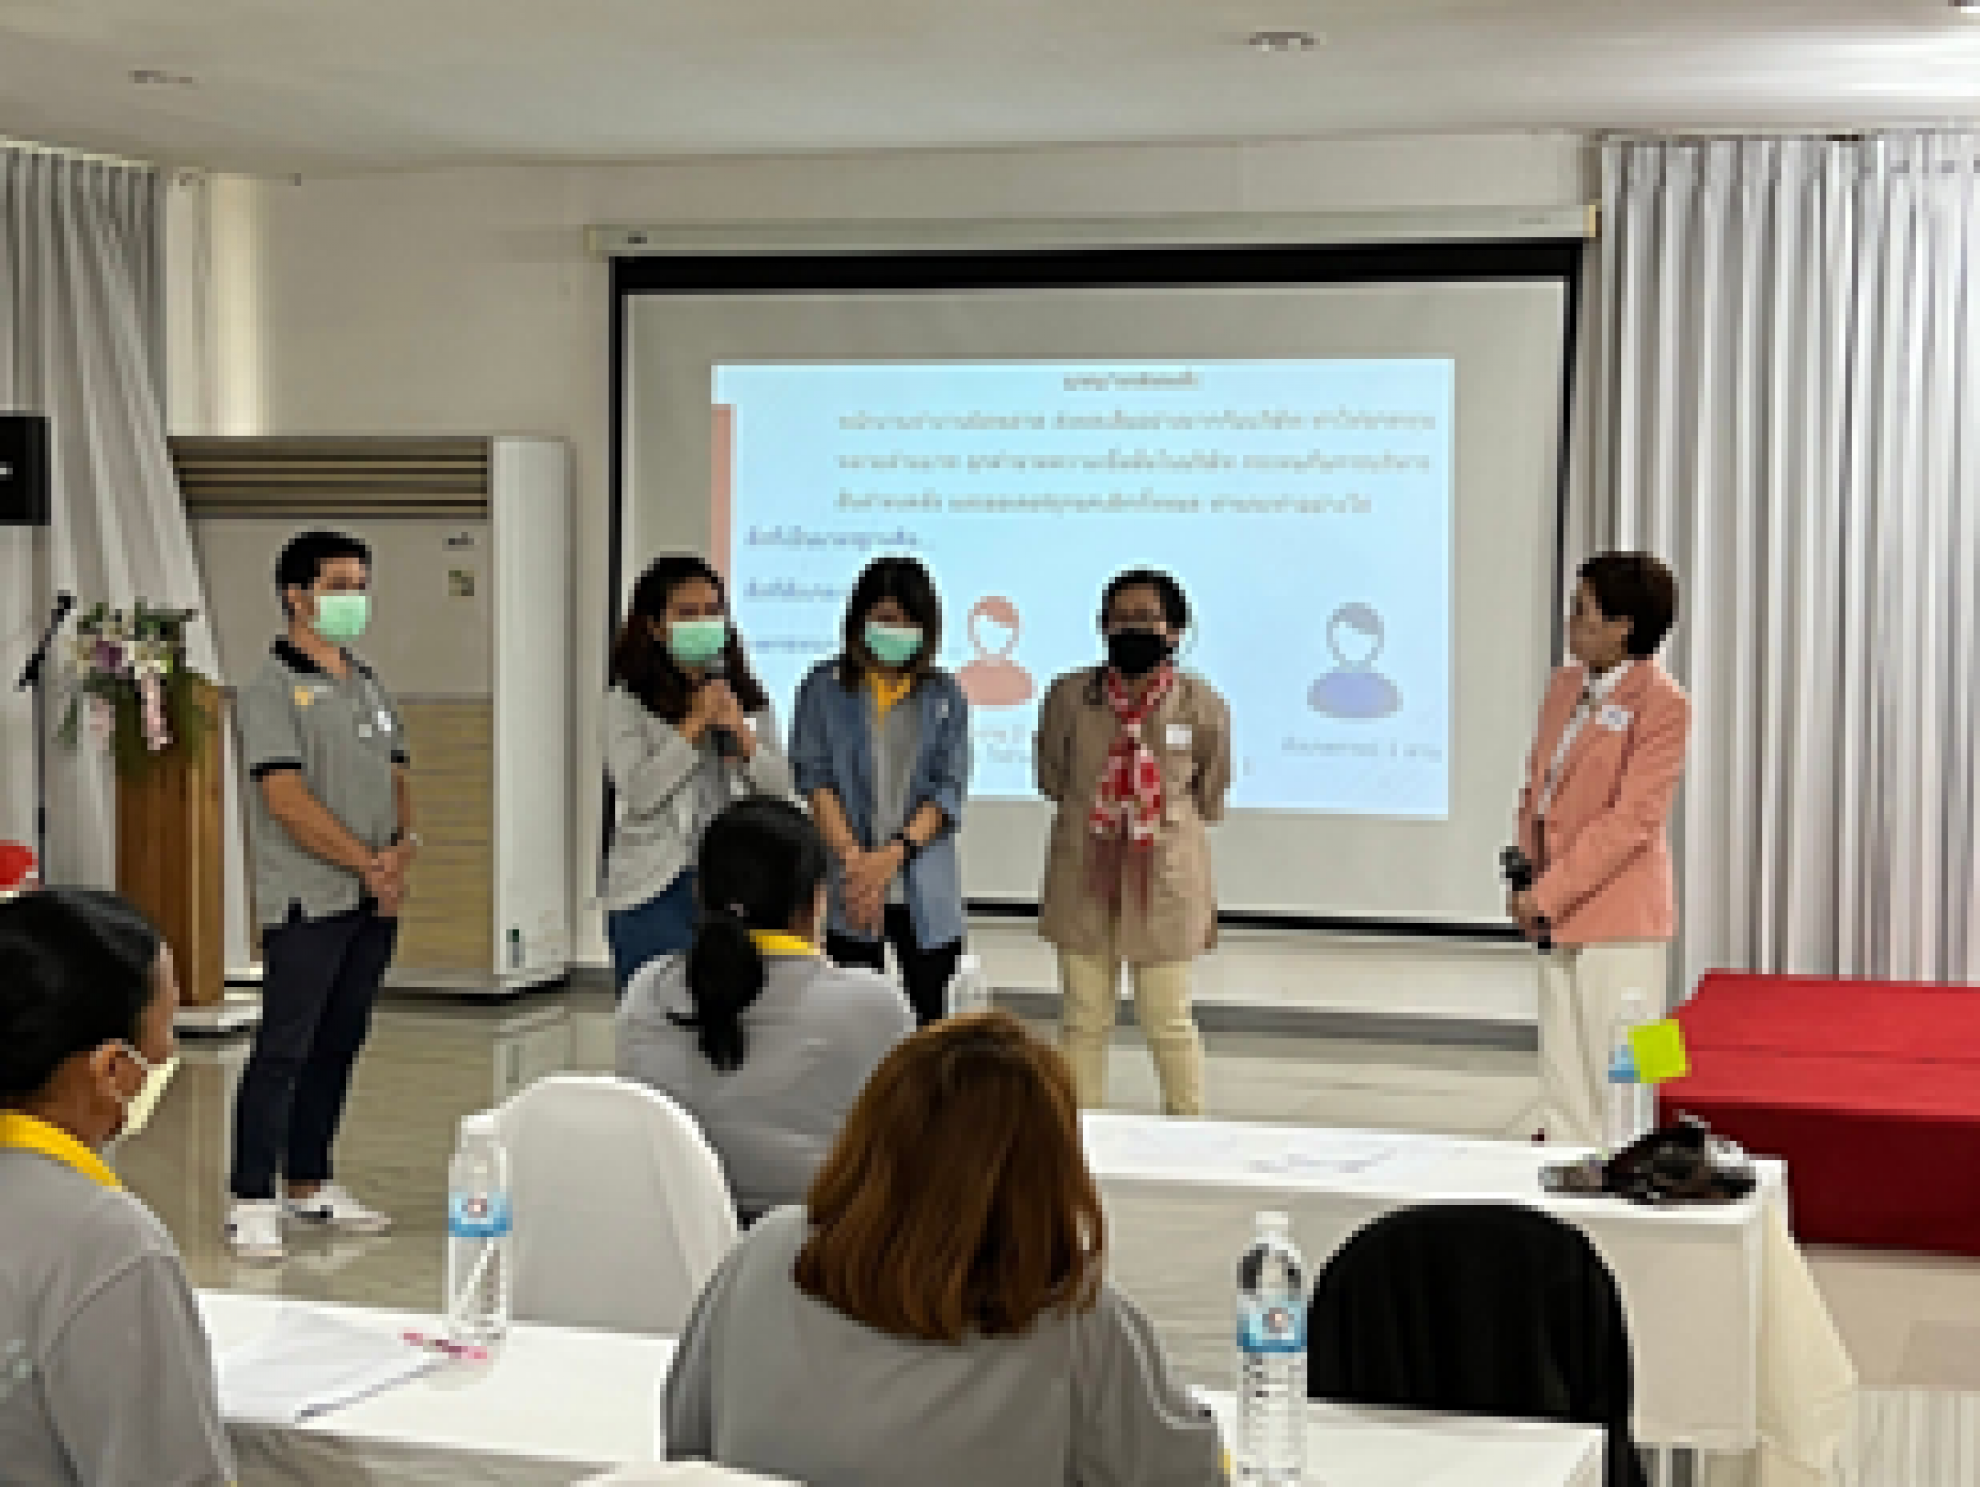 Engaging in a knowledge-sharing session where we explore challenges and the significance of adapting to adolescents in the digital age. This involves critical questioning, open discussions of opinions, and the recognition of valuable contributions, including rewarding compliments and other forms of acknowledgment.